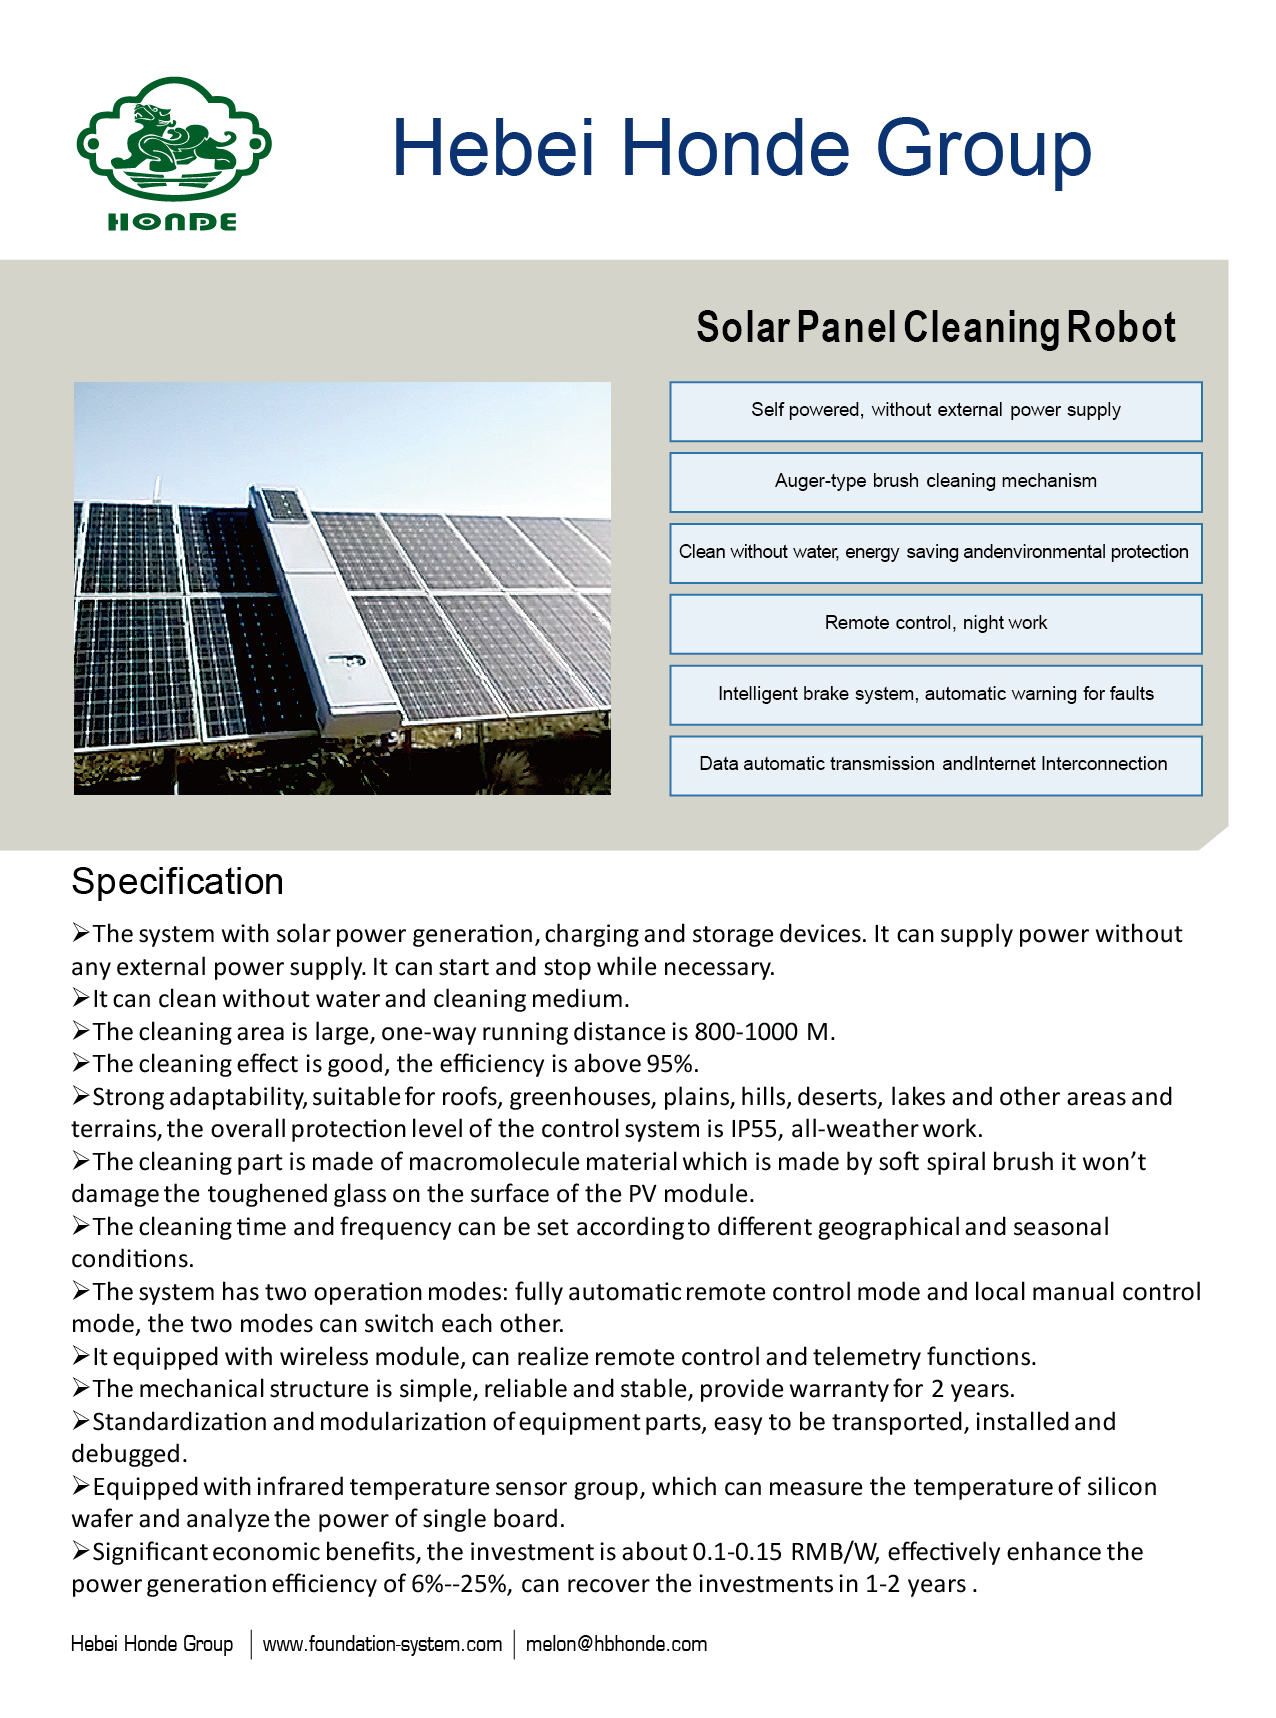 Automated Solar Panel Cleaning Robot